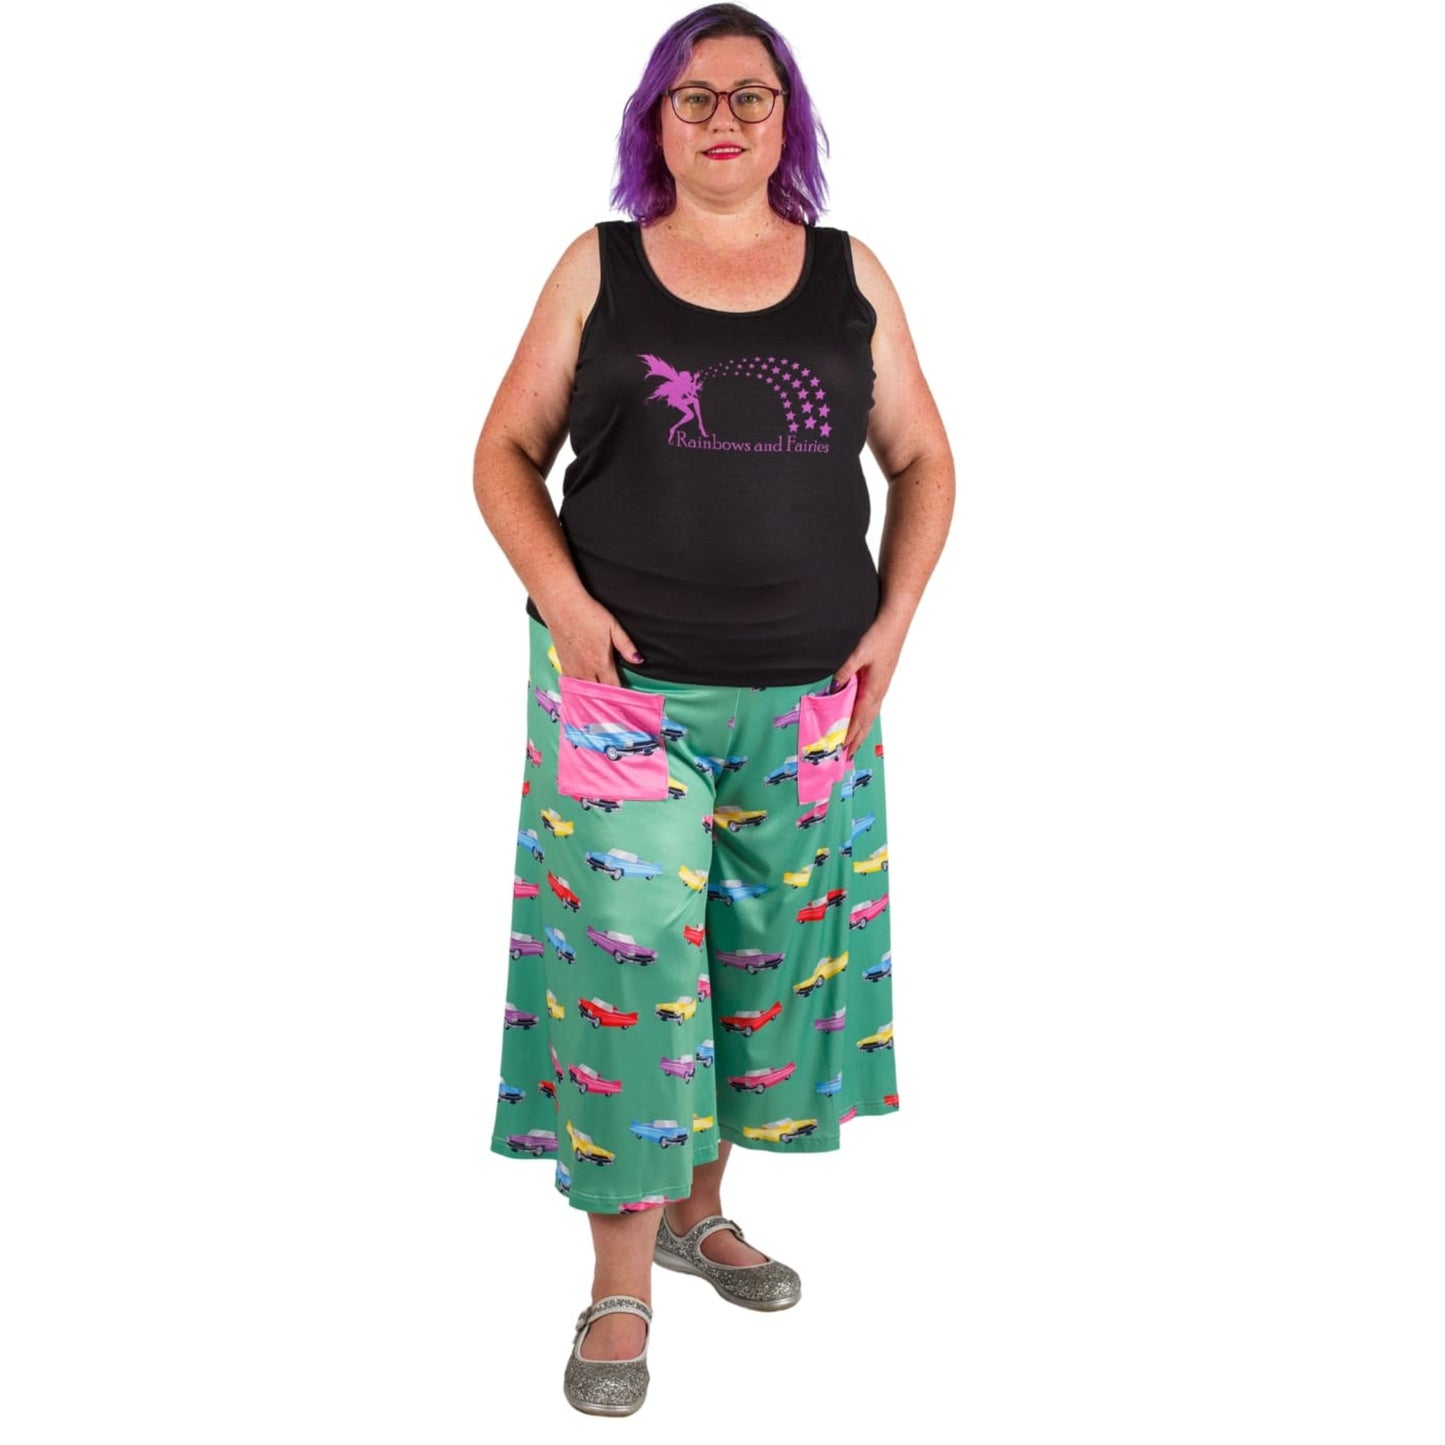 Cadillac Culottes by RainbowsAndFairies.com.au (Vintage Car - Antique - 3 Quarter Pants - Kitsch - Vintage Inspired - Pink Cadillac - Rock & Roll) - SKU: CL_CULTS_CADIL_ORG - Pic-04